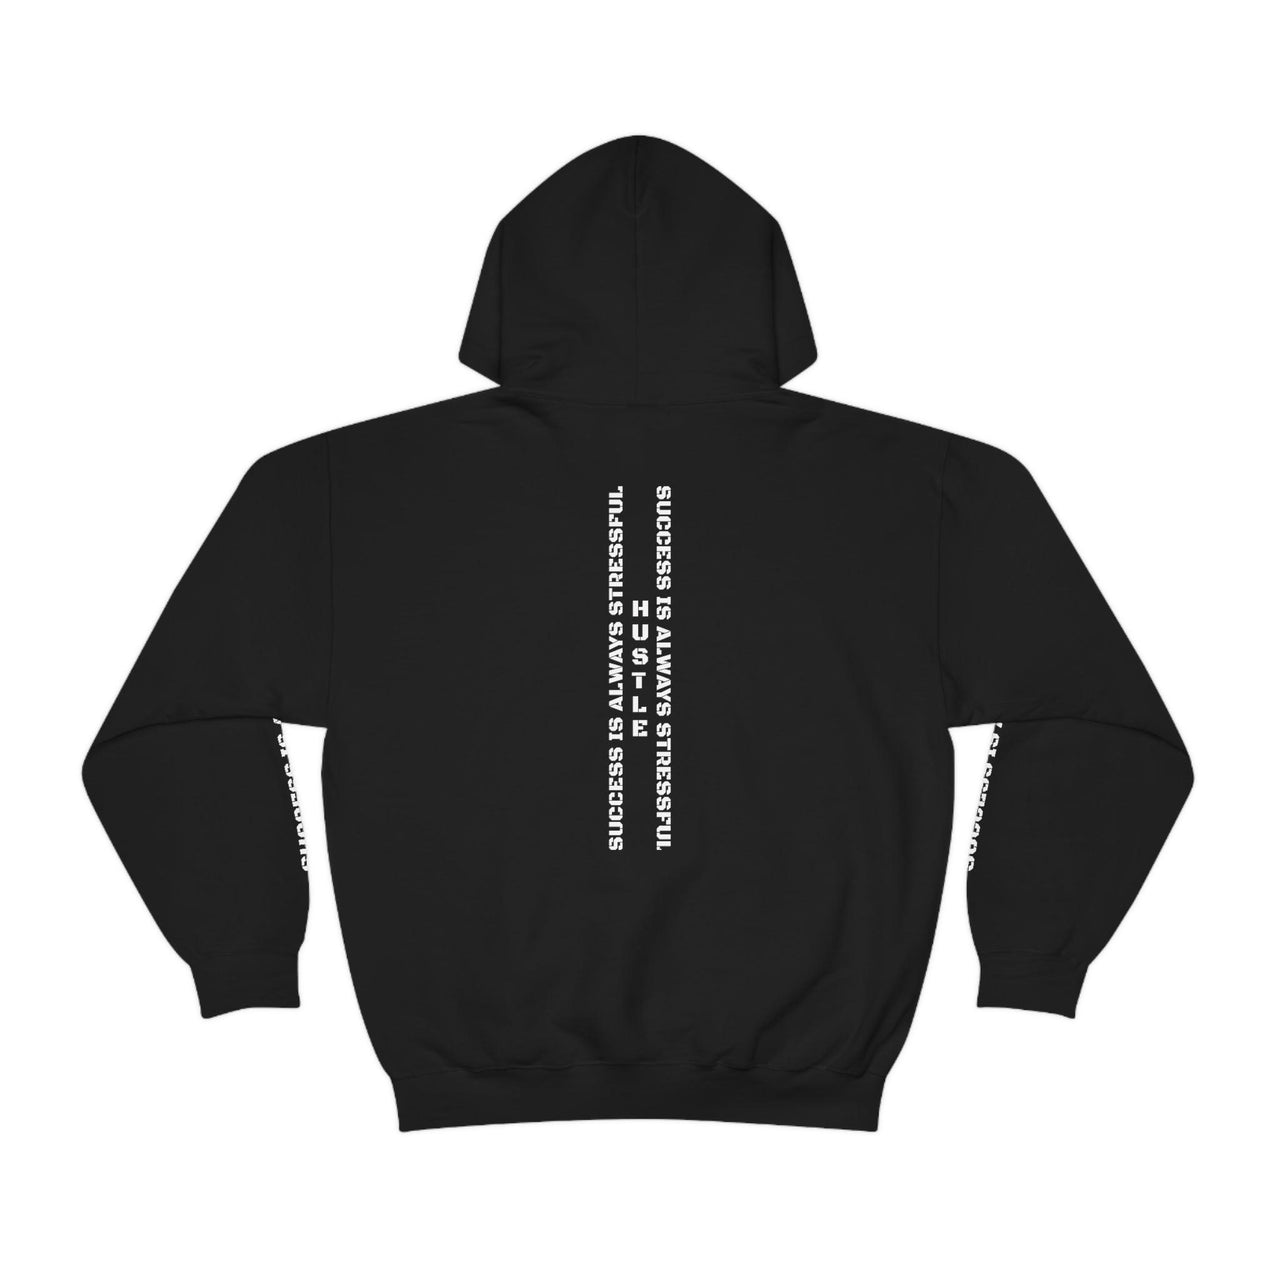 Stay focused on your goals with an Andrew Tate motivational sweatshirt featuring the quote 'Success is always stressful.' Hoodies available in a range of sizes and shipped worldwide at low prices.